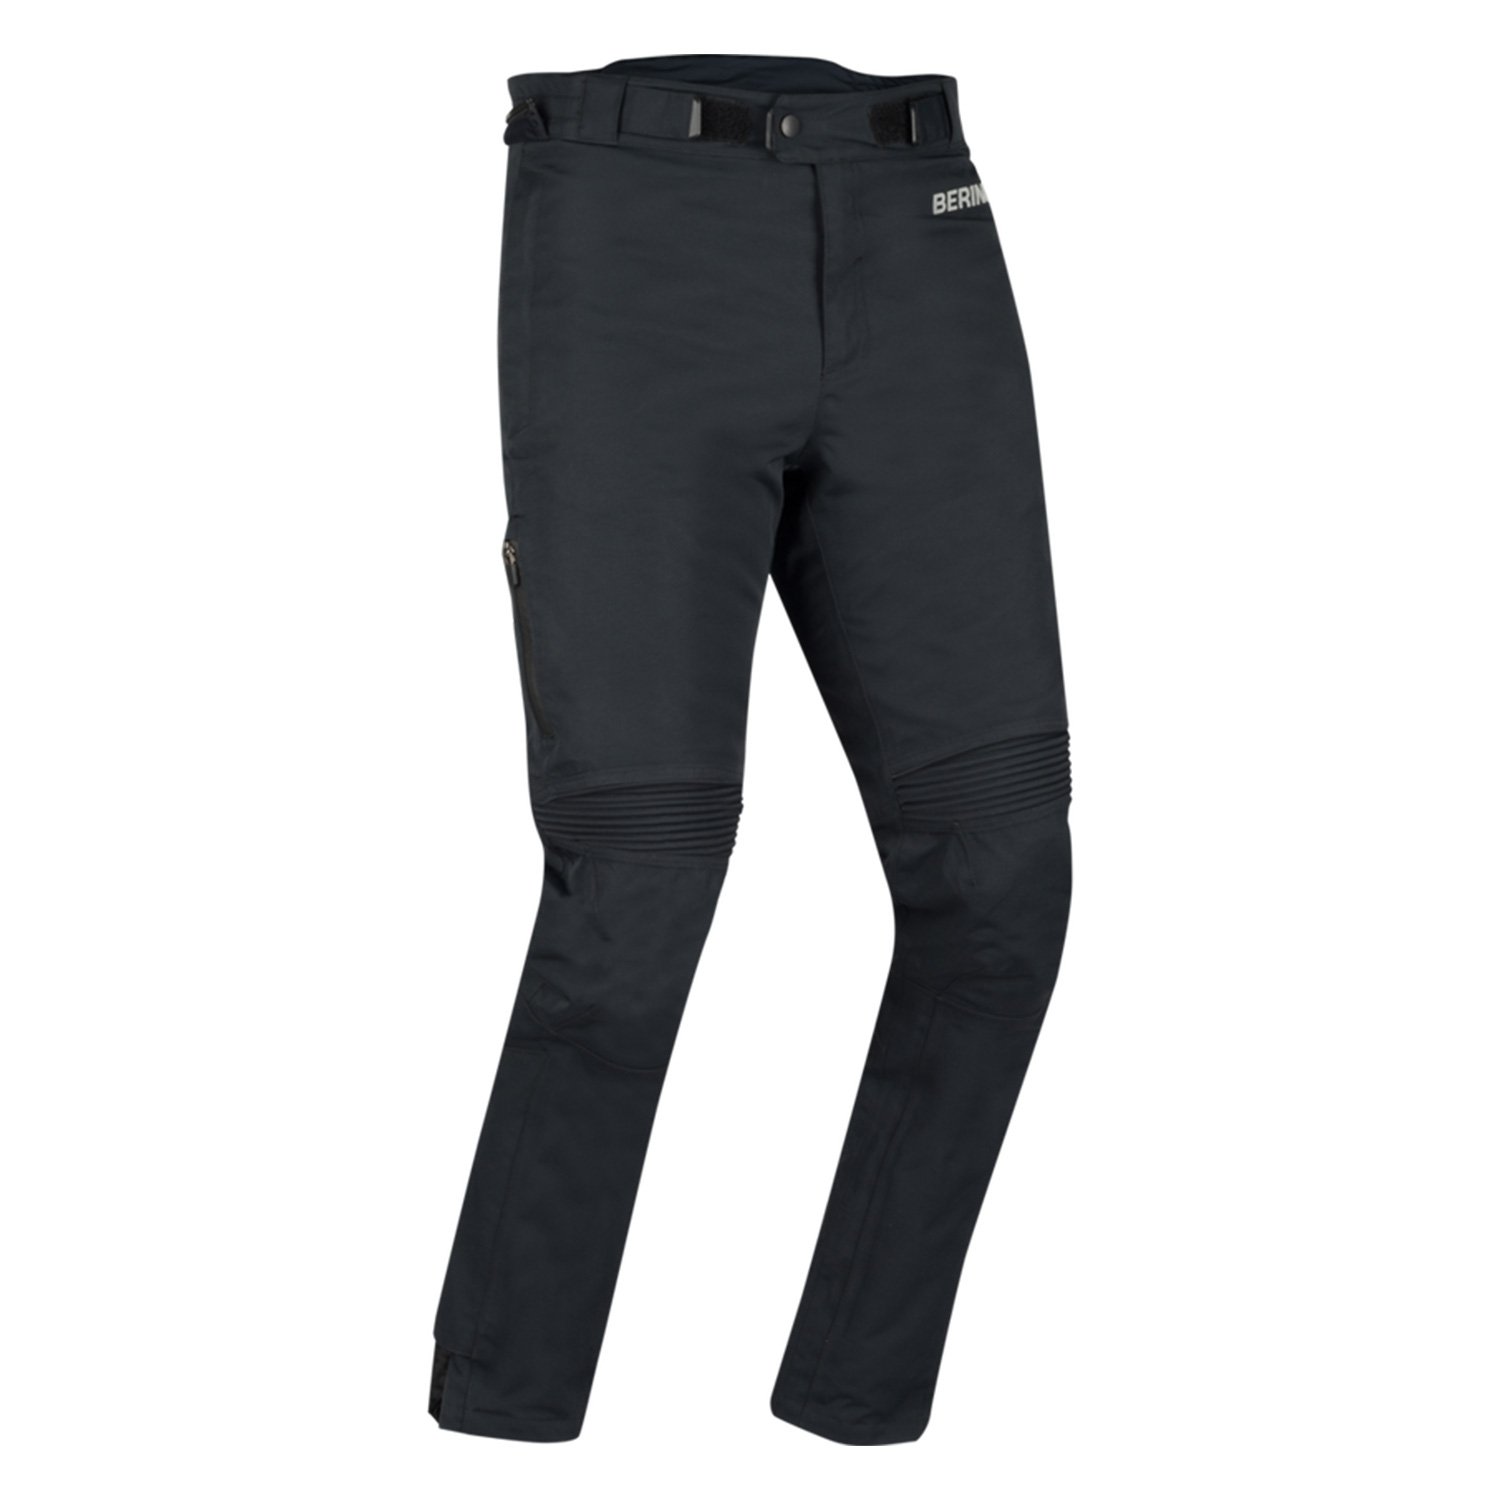 Image of EU Bering Zephyr Trousers Black Taille L